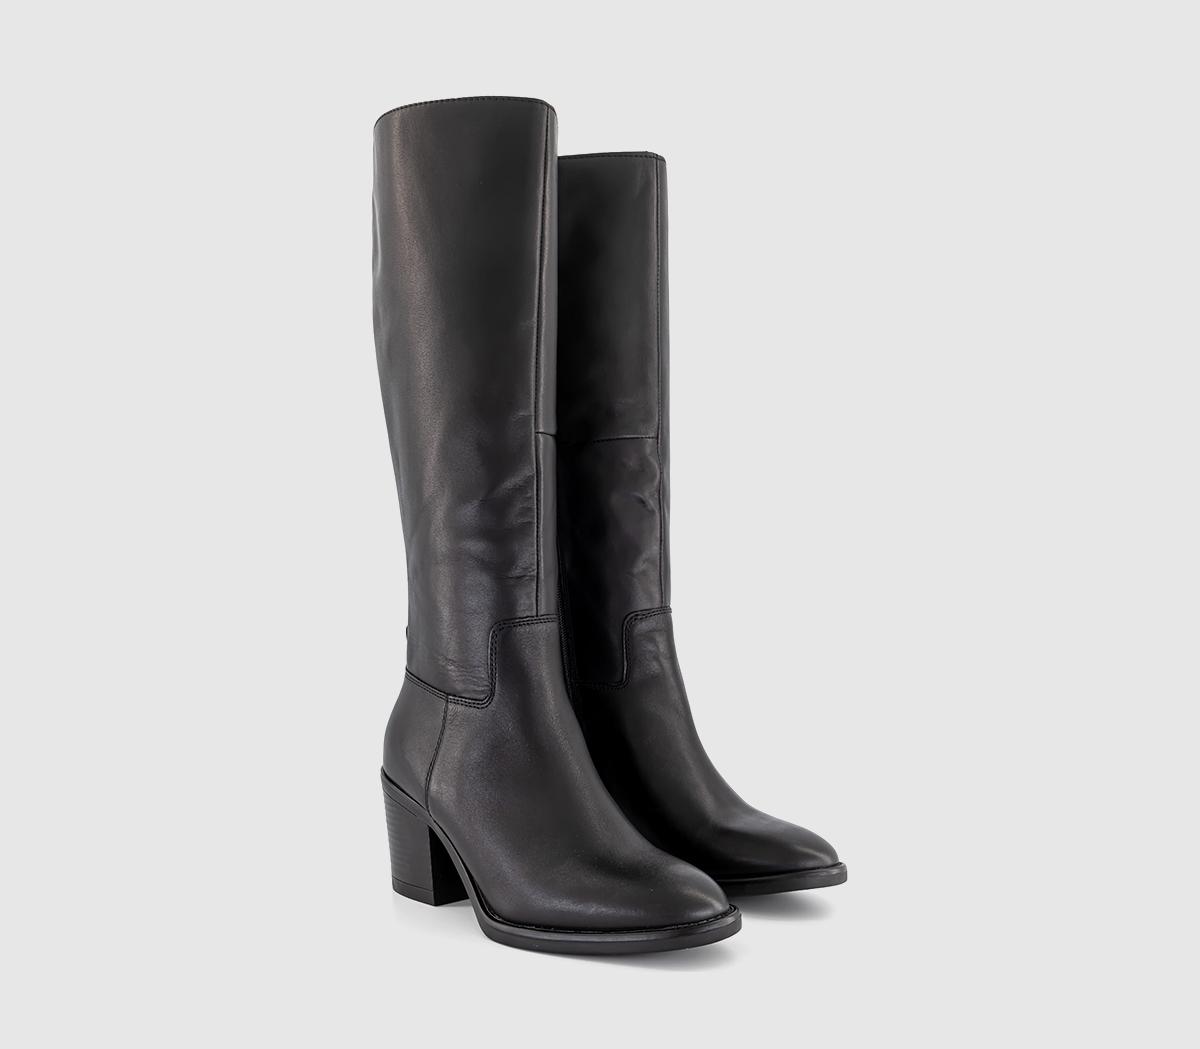 OFFICE Kamille Round Toe Block Heel Boots Black Leather - Knee High Boots